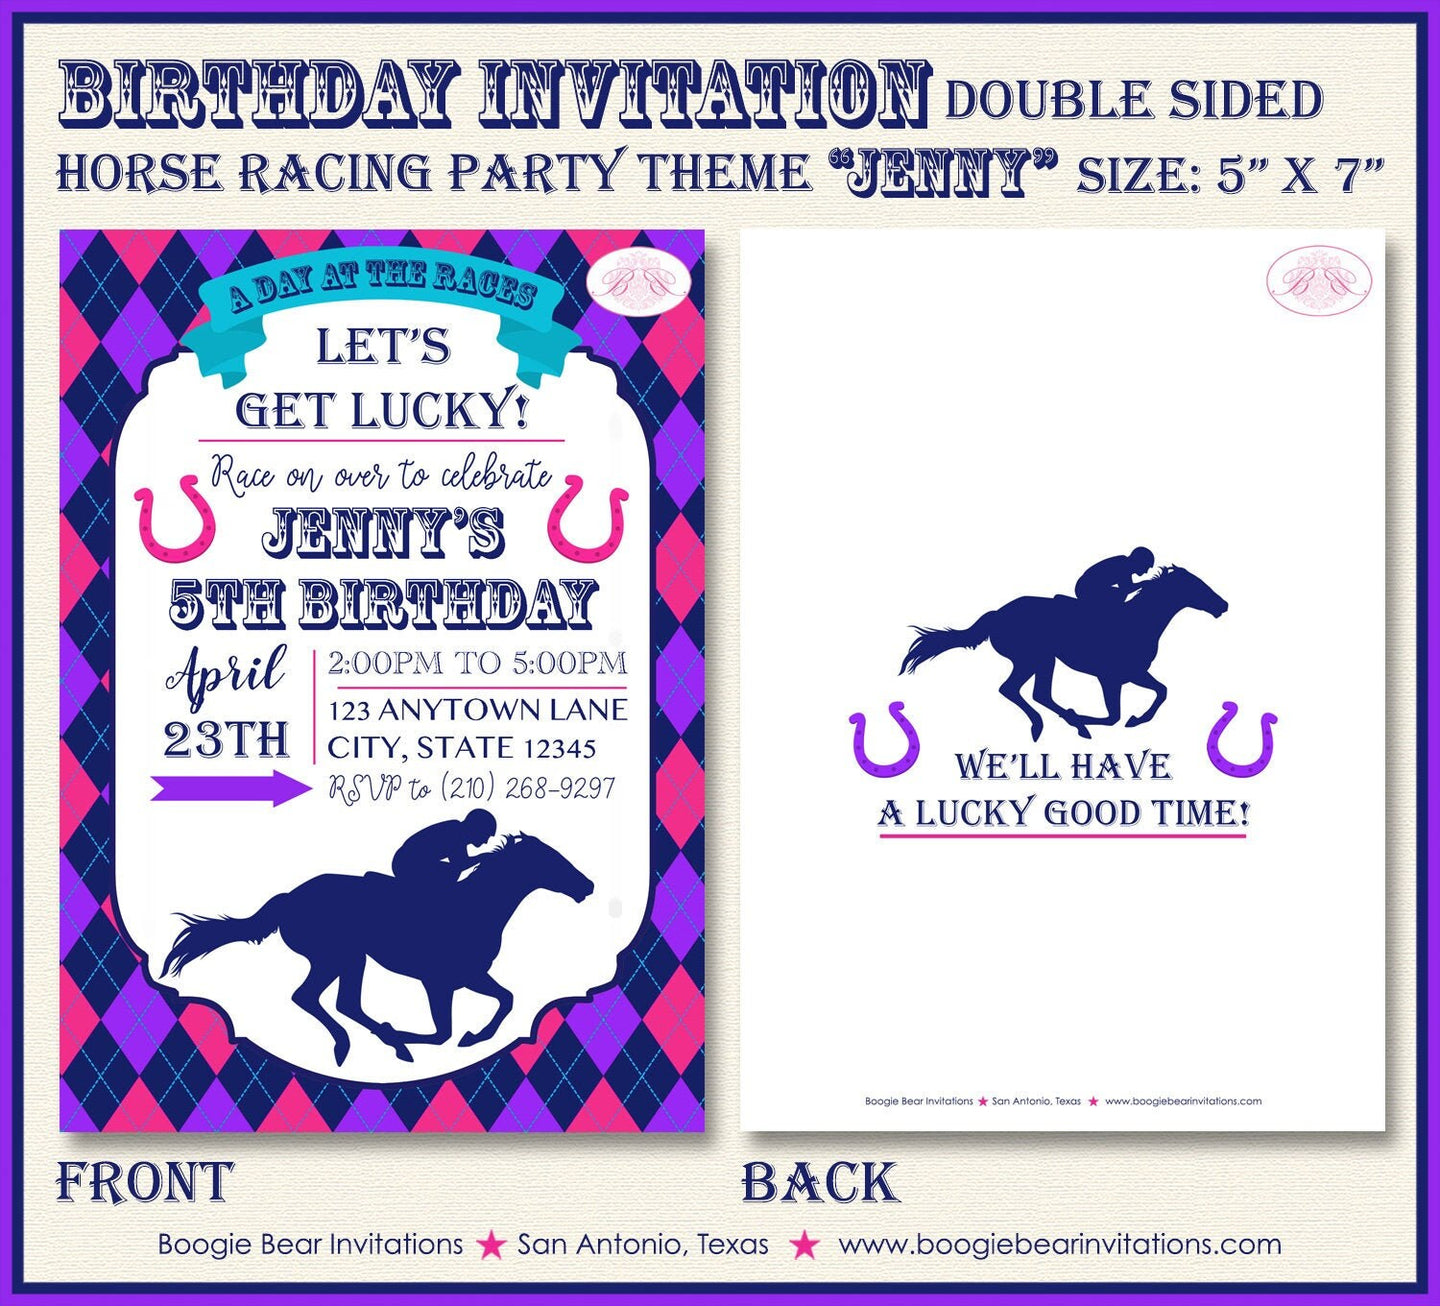 Horse Racing Birthday Party Invitation Pink Purple Girl Kentucky Derby Track Boogie Bear Invitations Jenny Theme Paperless Printable Printed